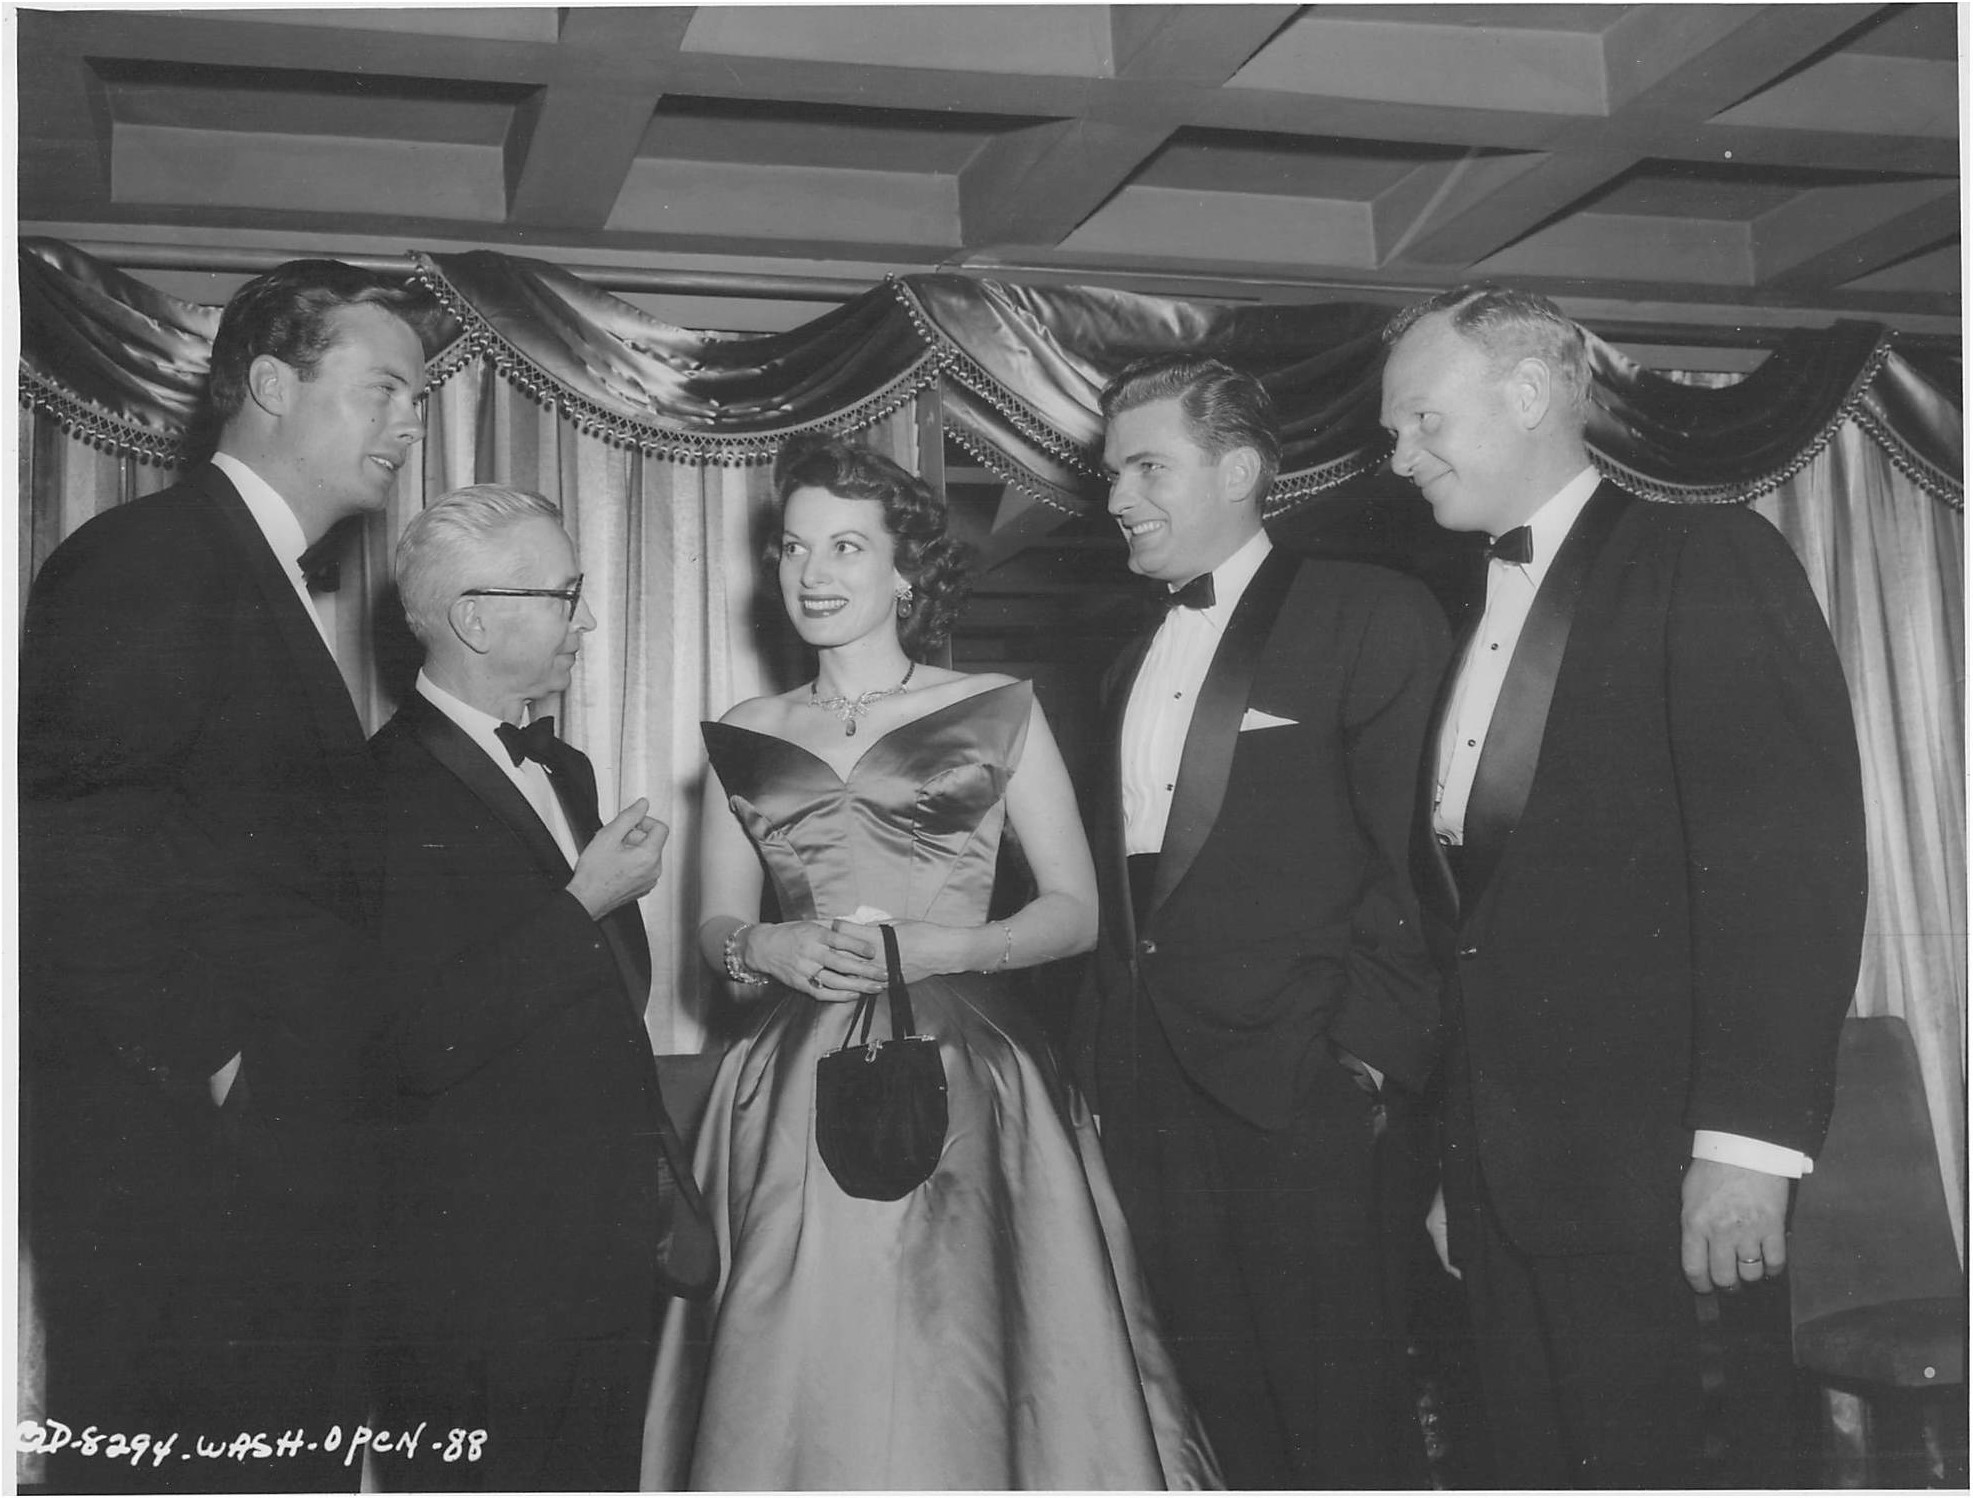  Feb. 8?, 1955  Washington, D.C., premiere of  The Long Gray Line.  First Lady Mamie Eisenhower attended this event. (See next photo.)  Above: Bob, unidentified man, Maureen O’Hara, William (Bill) Leslie (also in  The Long Gray Line ), and unidentifi